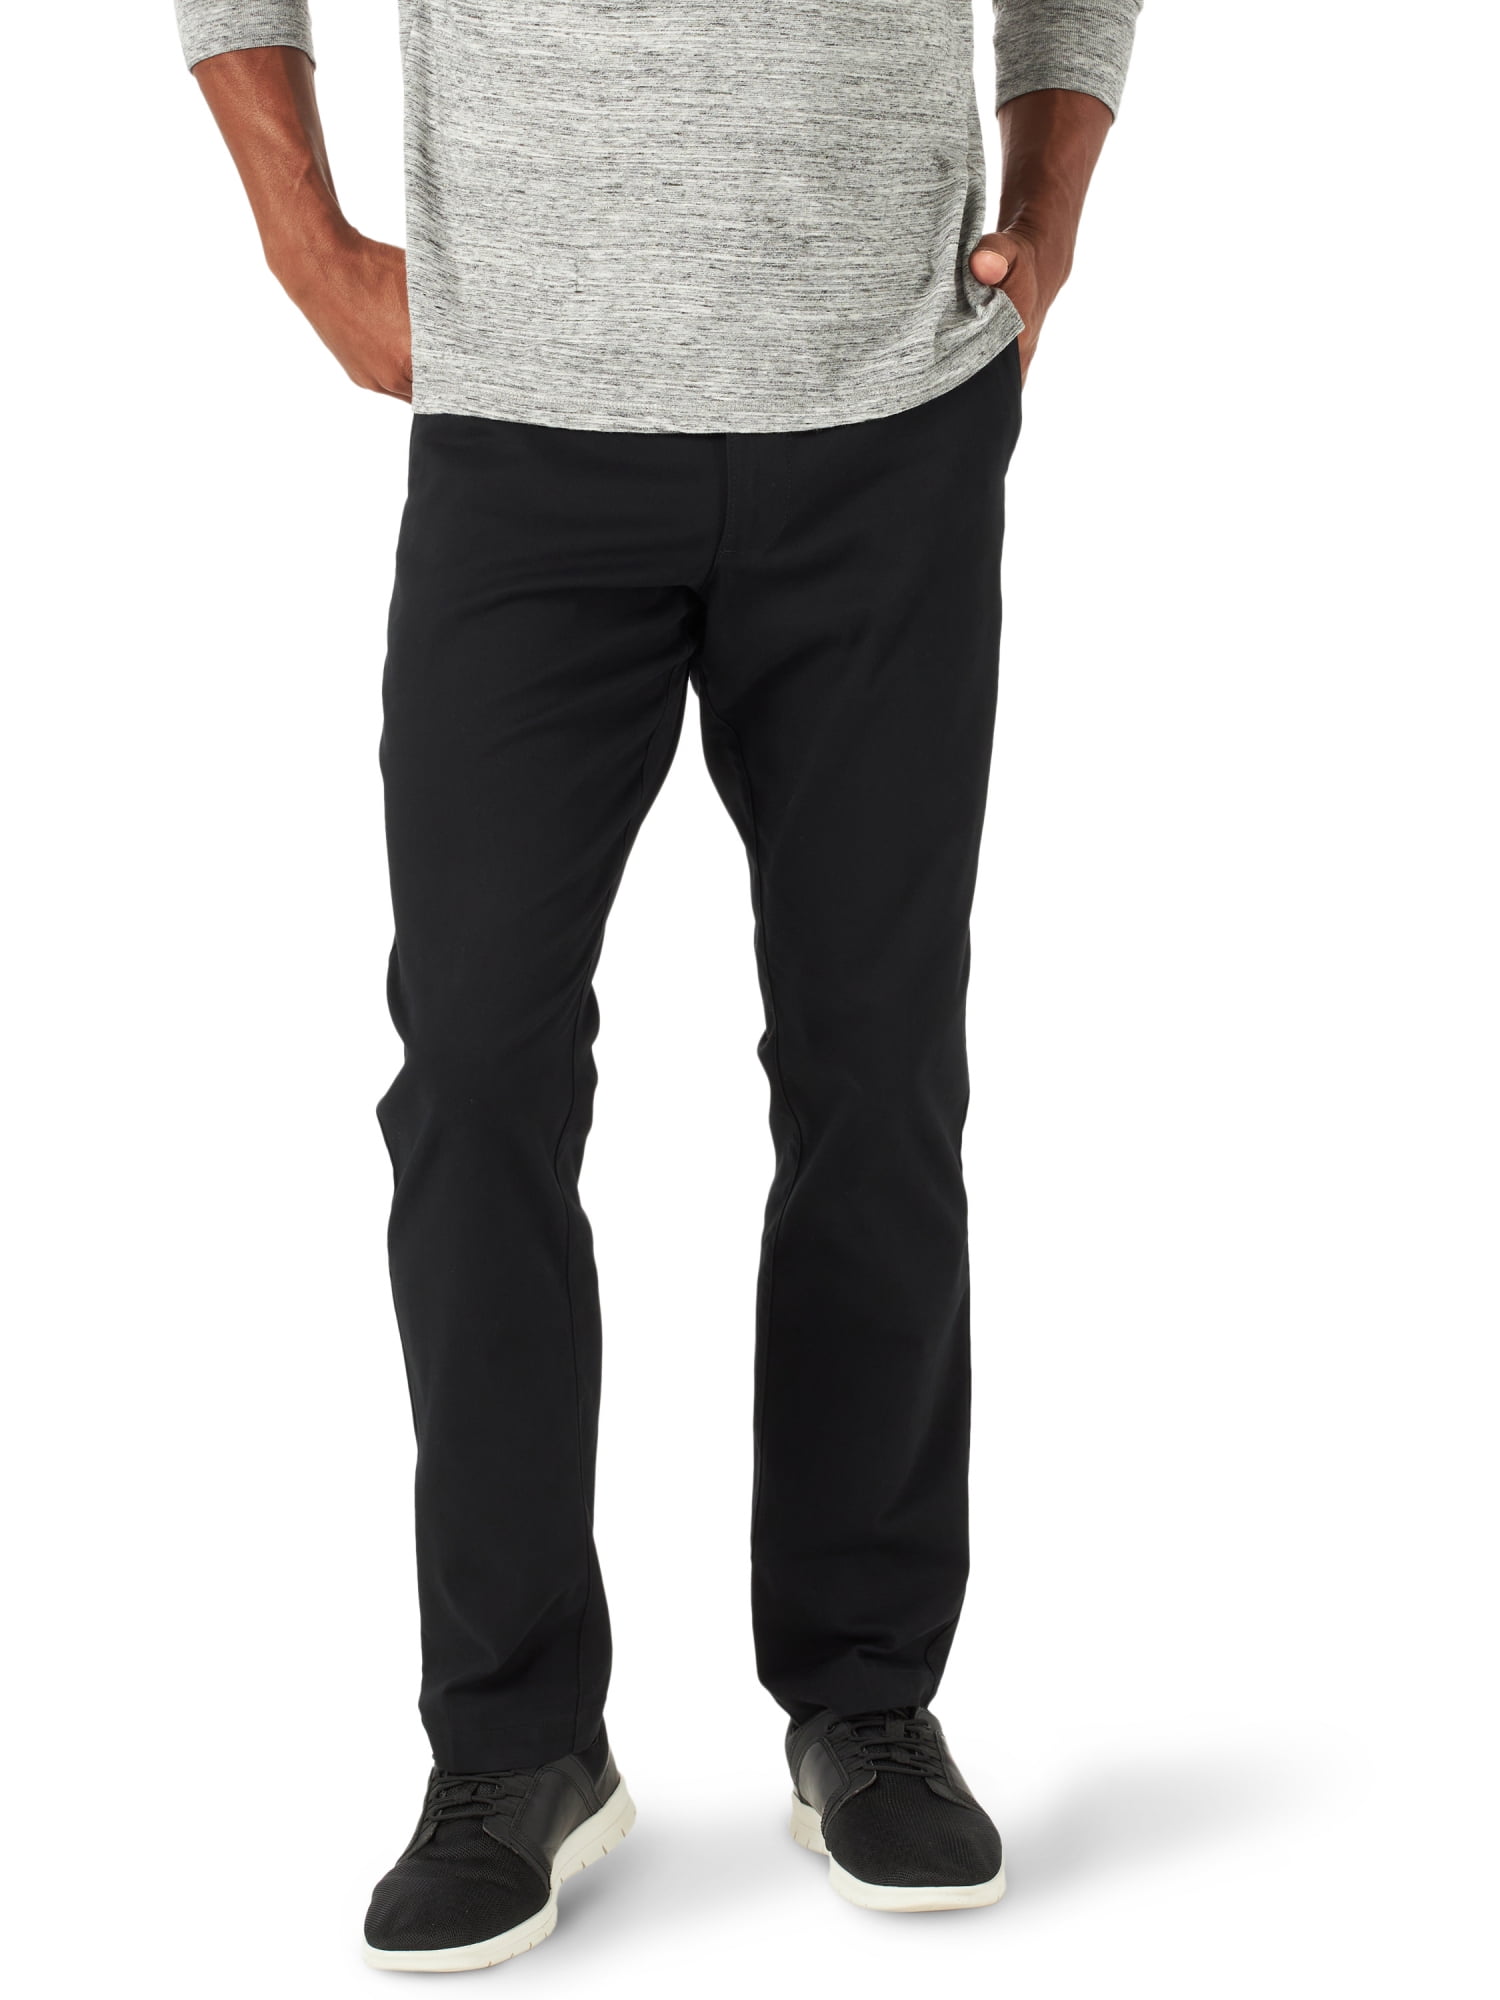 Lee Men's Extreme Comfort Relaxed Fit Pant - Walmart.com